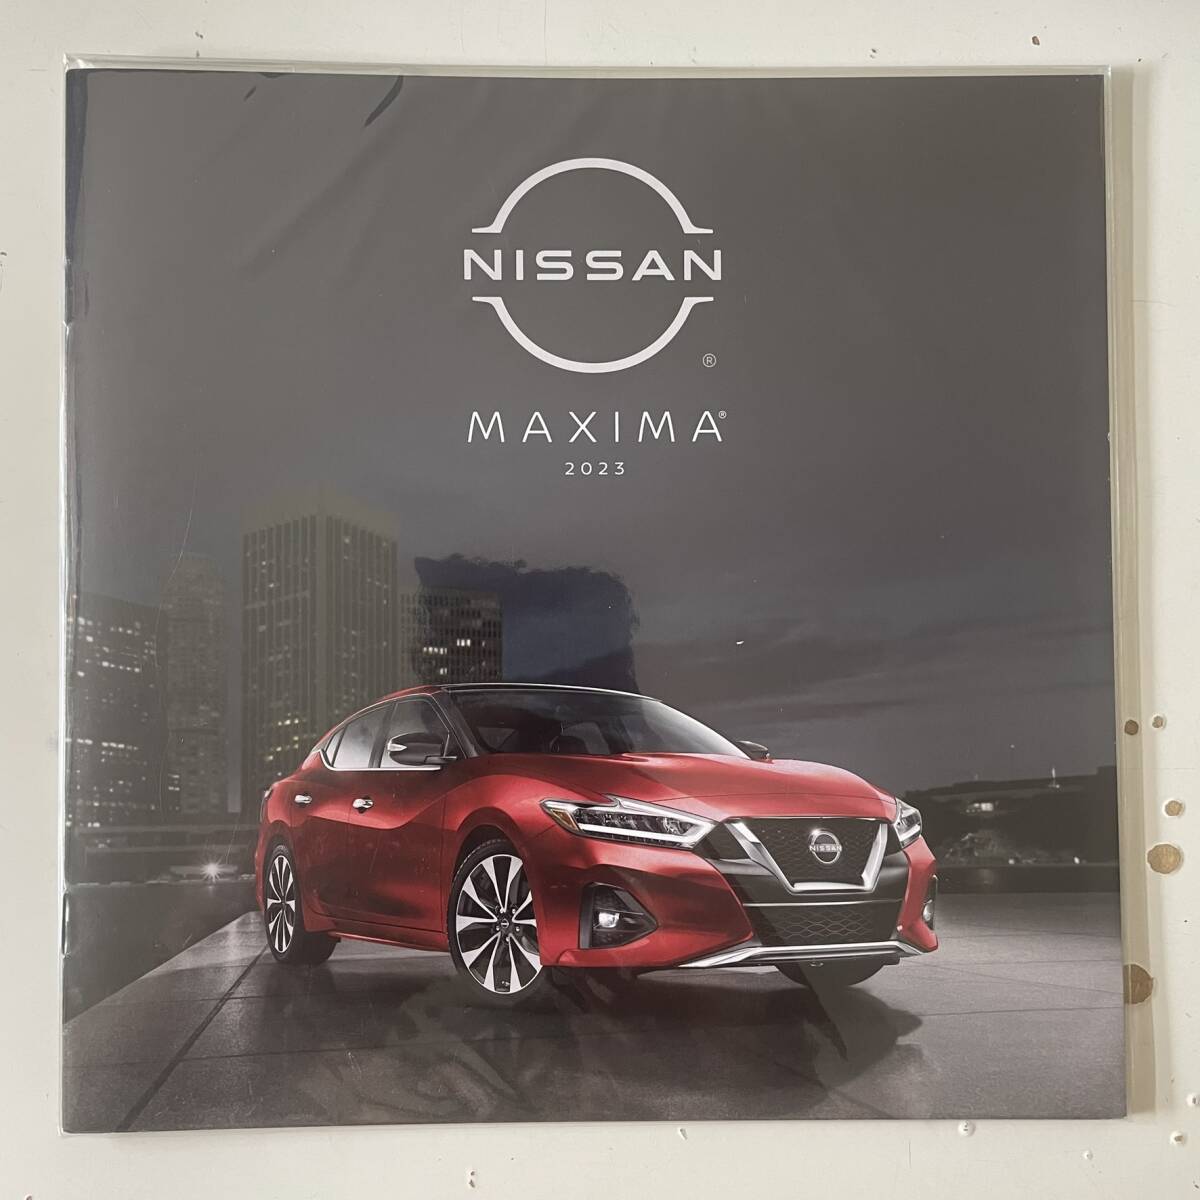 US NISSAN MAXIMA 2023 北米 アメリカ ハワイ 日産 マキシマ カタログ HILIFE UDOWN IN4MATION 808ALLDAY USDM HDM